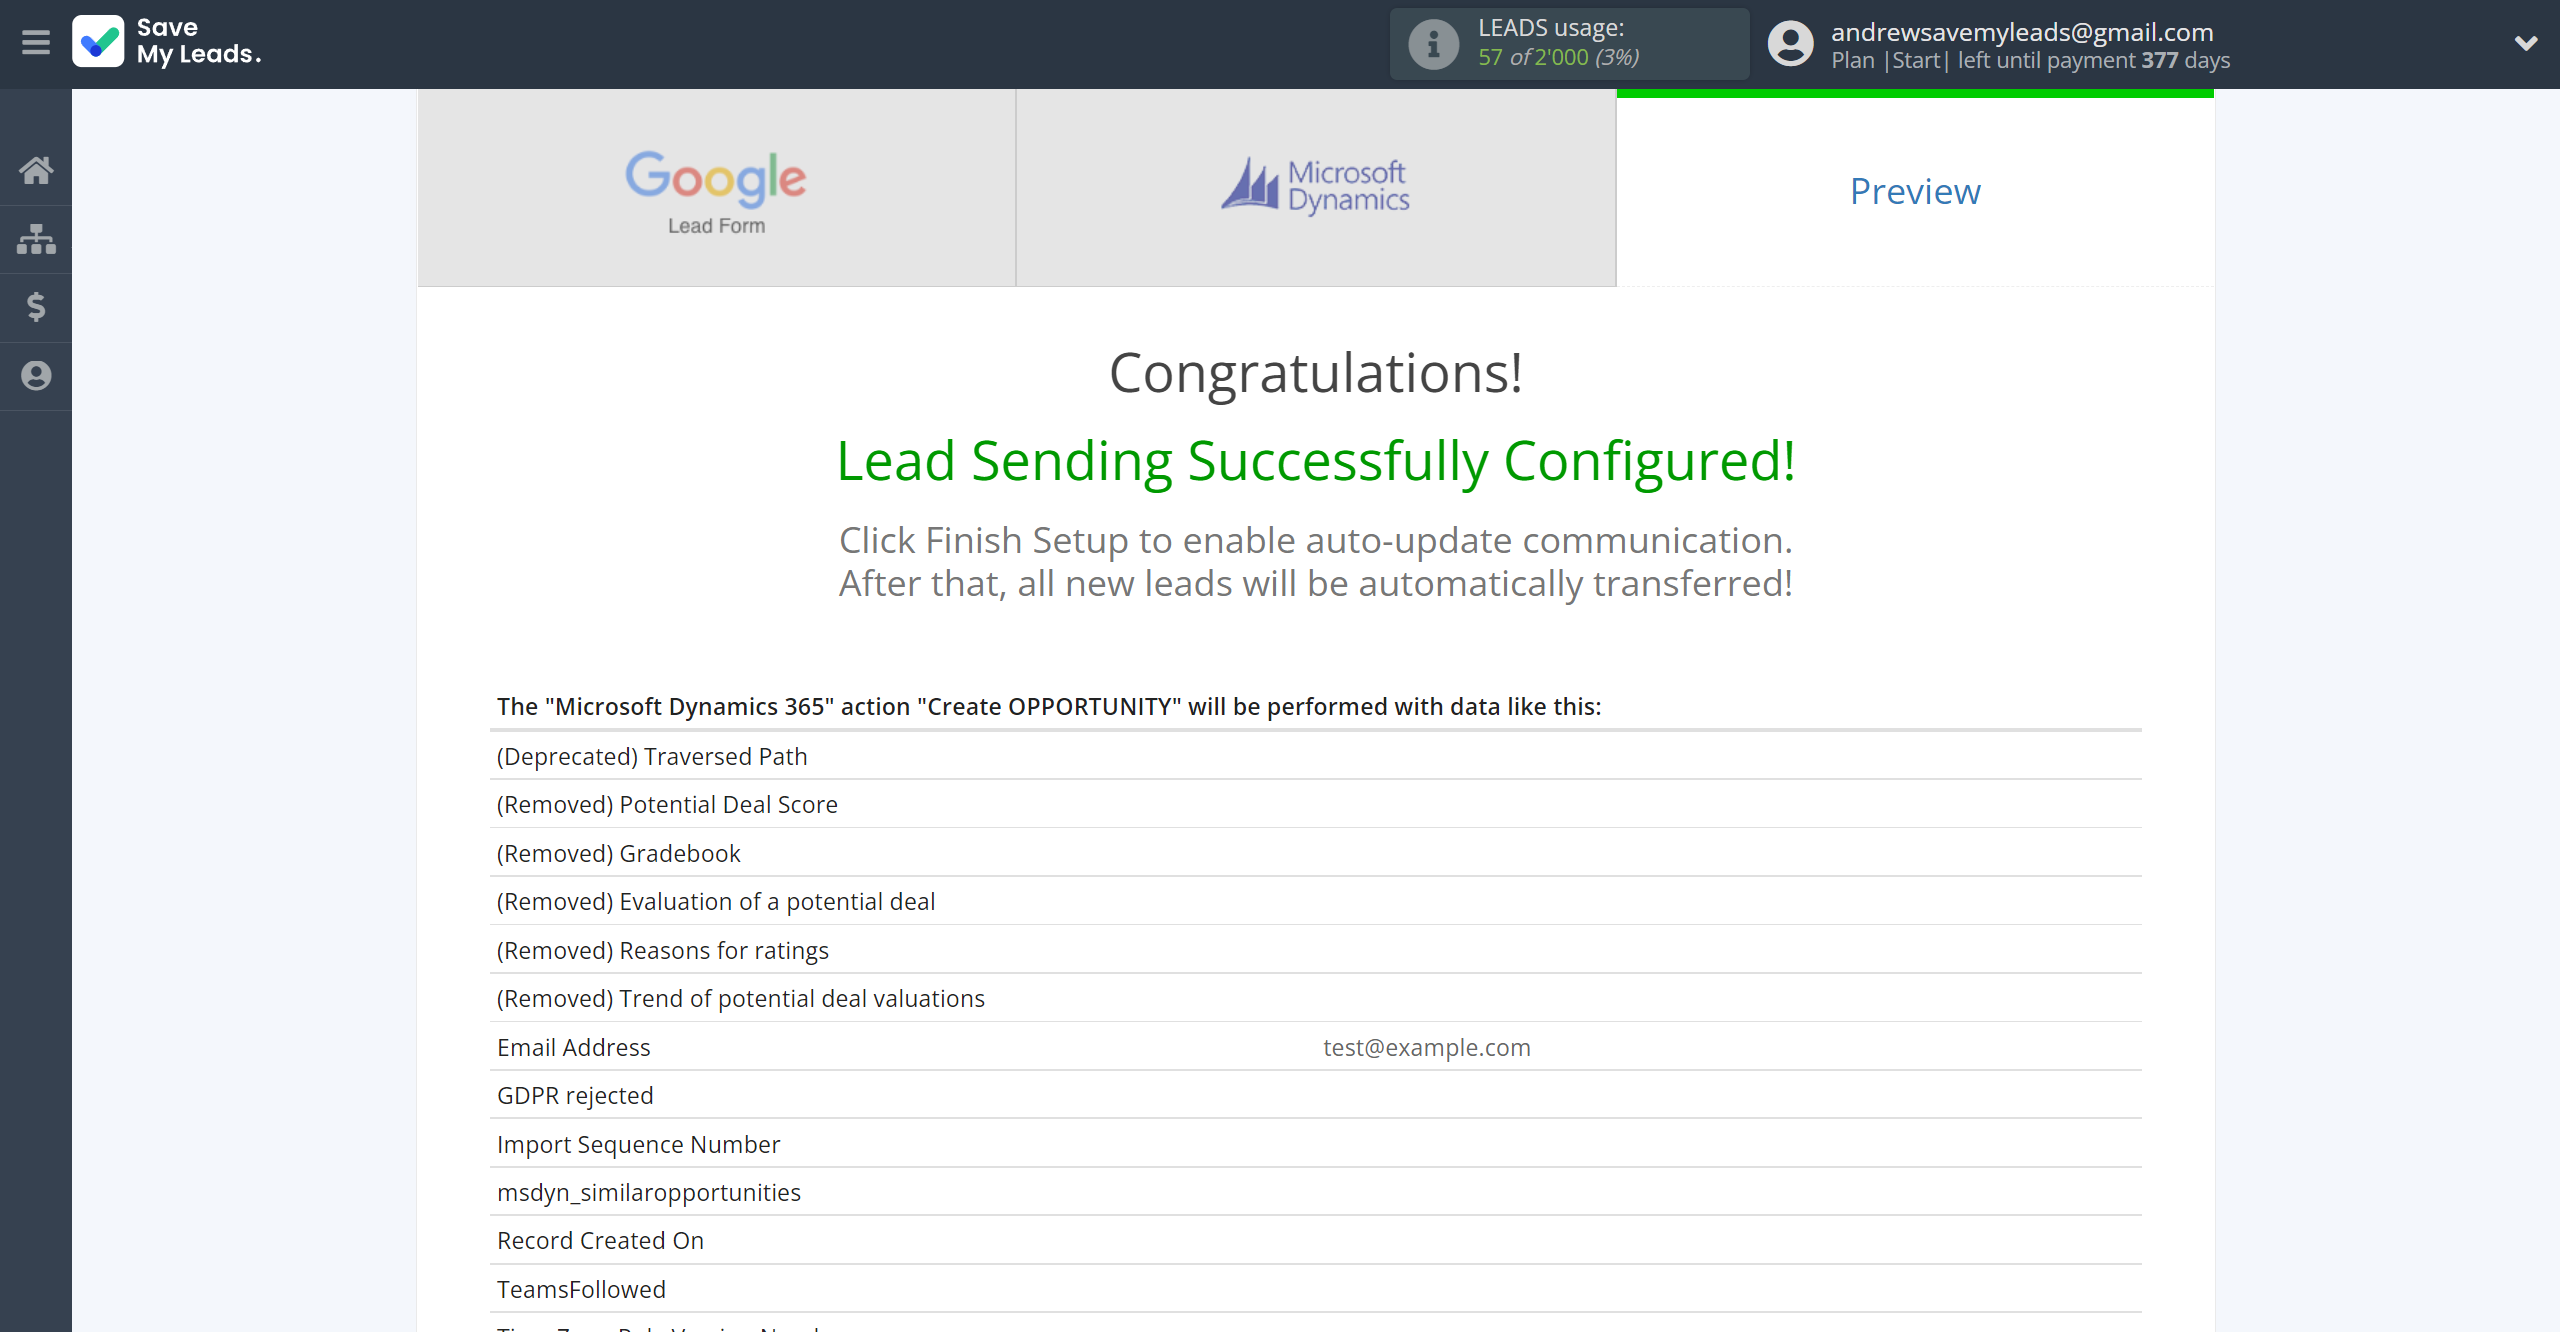 How to Connect Google Lead Form with Microsoft Dynamics 365 Create Opportunity | Test data